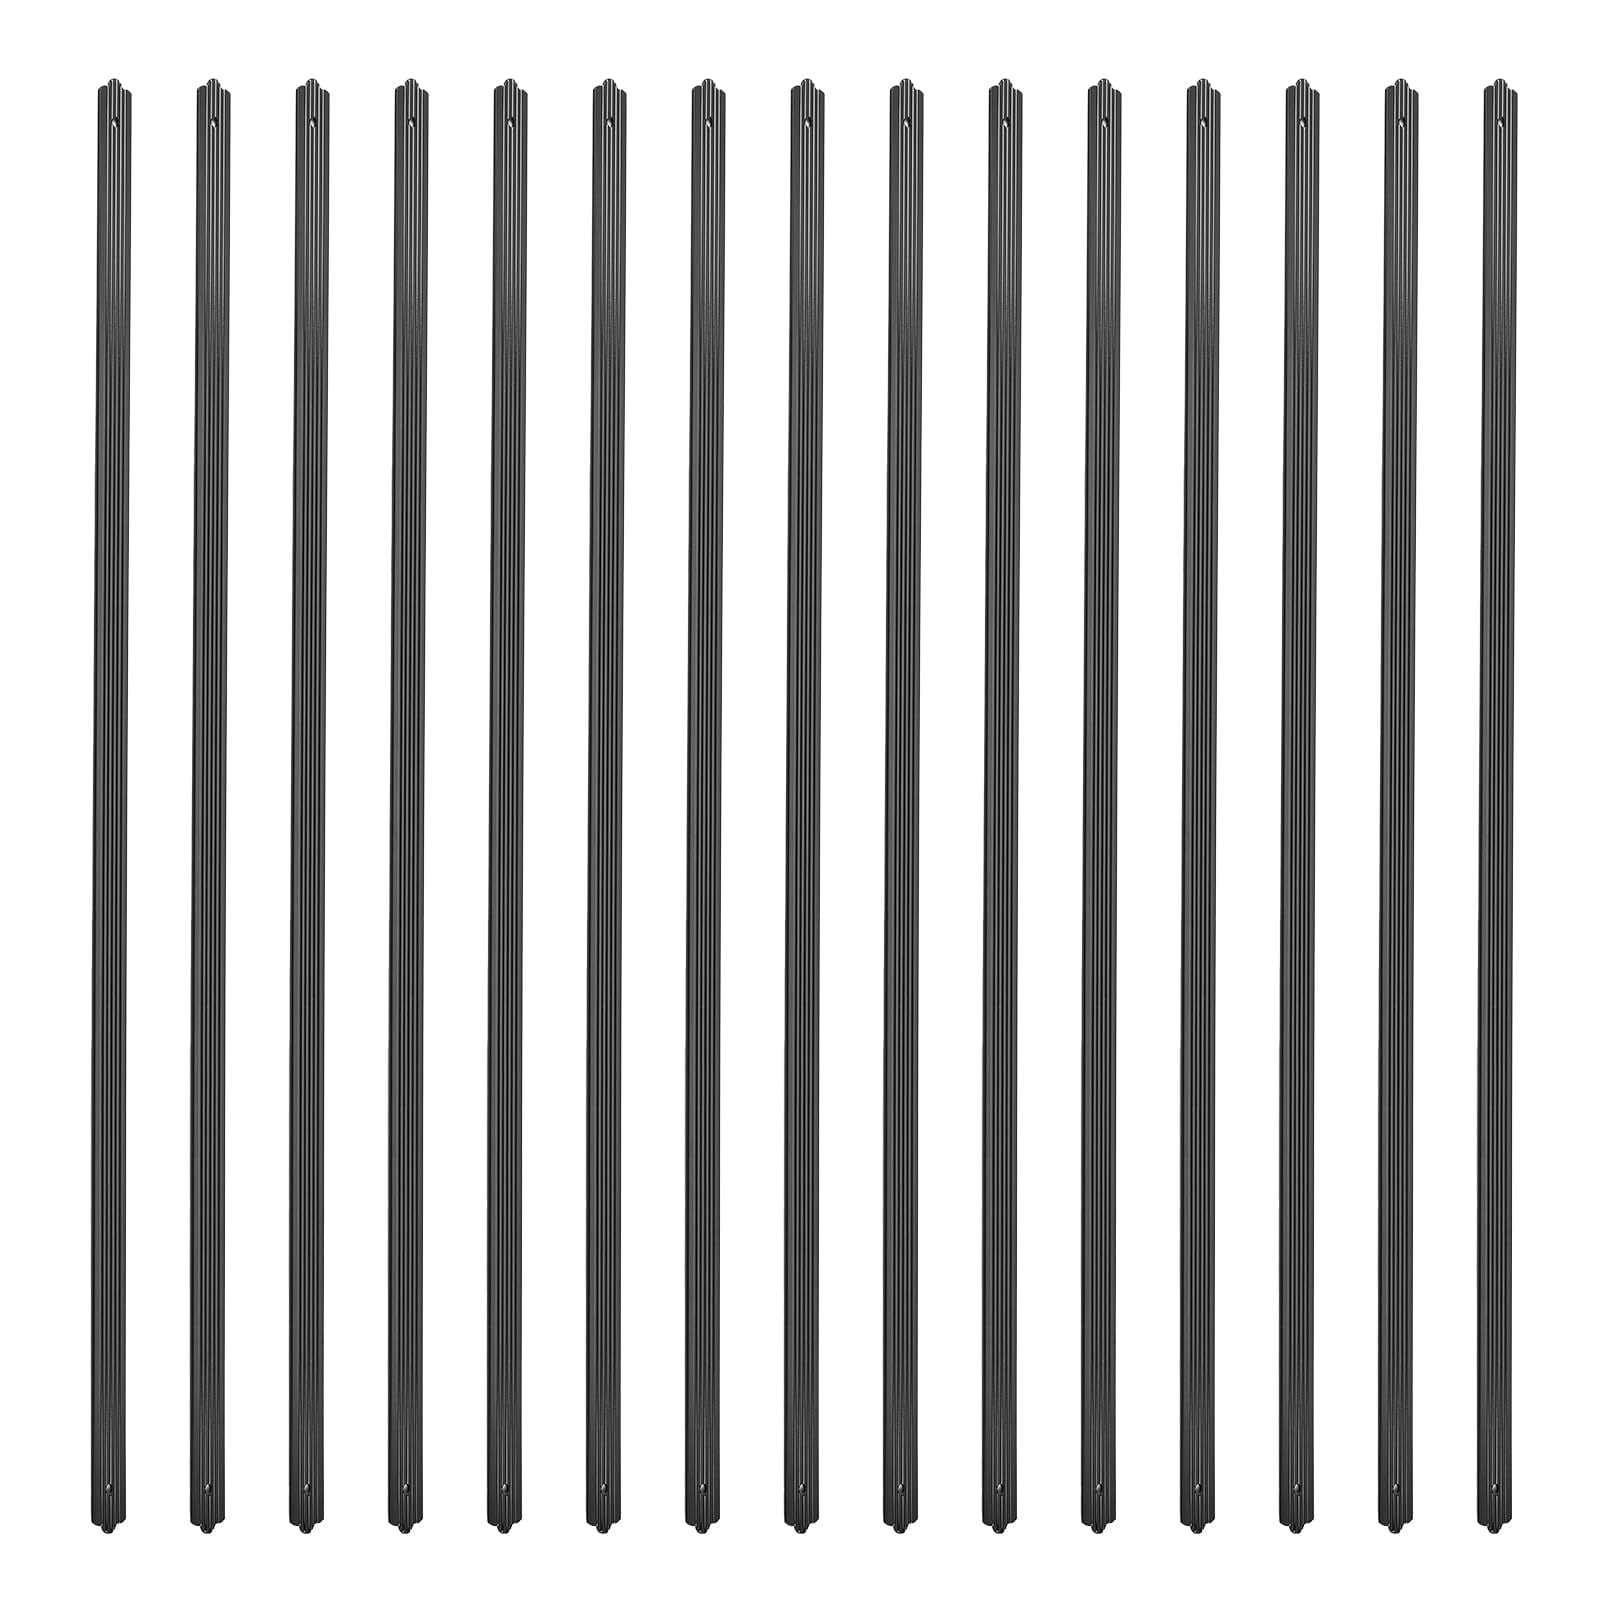 Aluminum Deck Balusters 32.25x1 Inch, Black, for Porch & Stairs